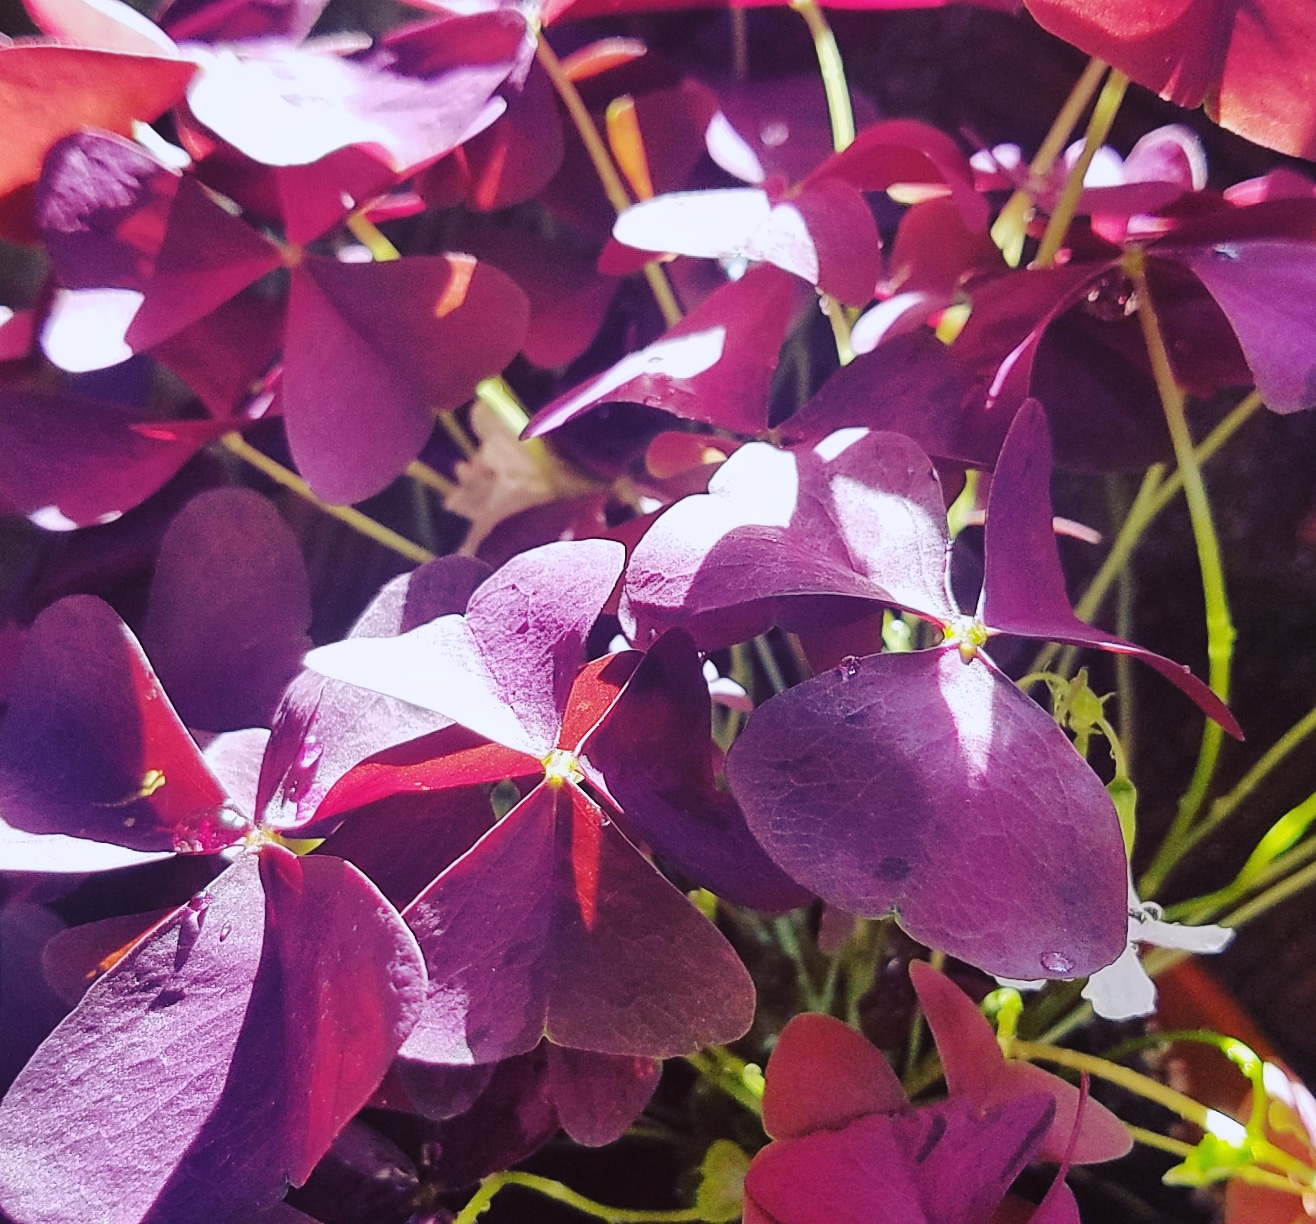 Ode to Oxalis